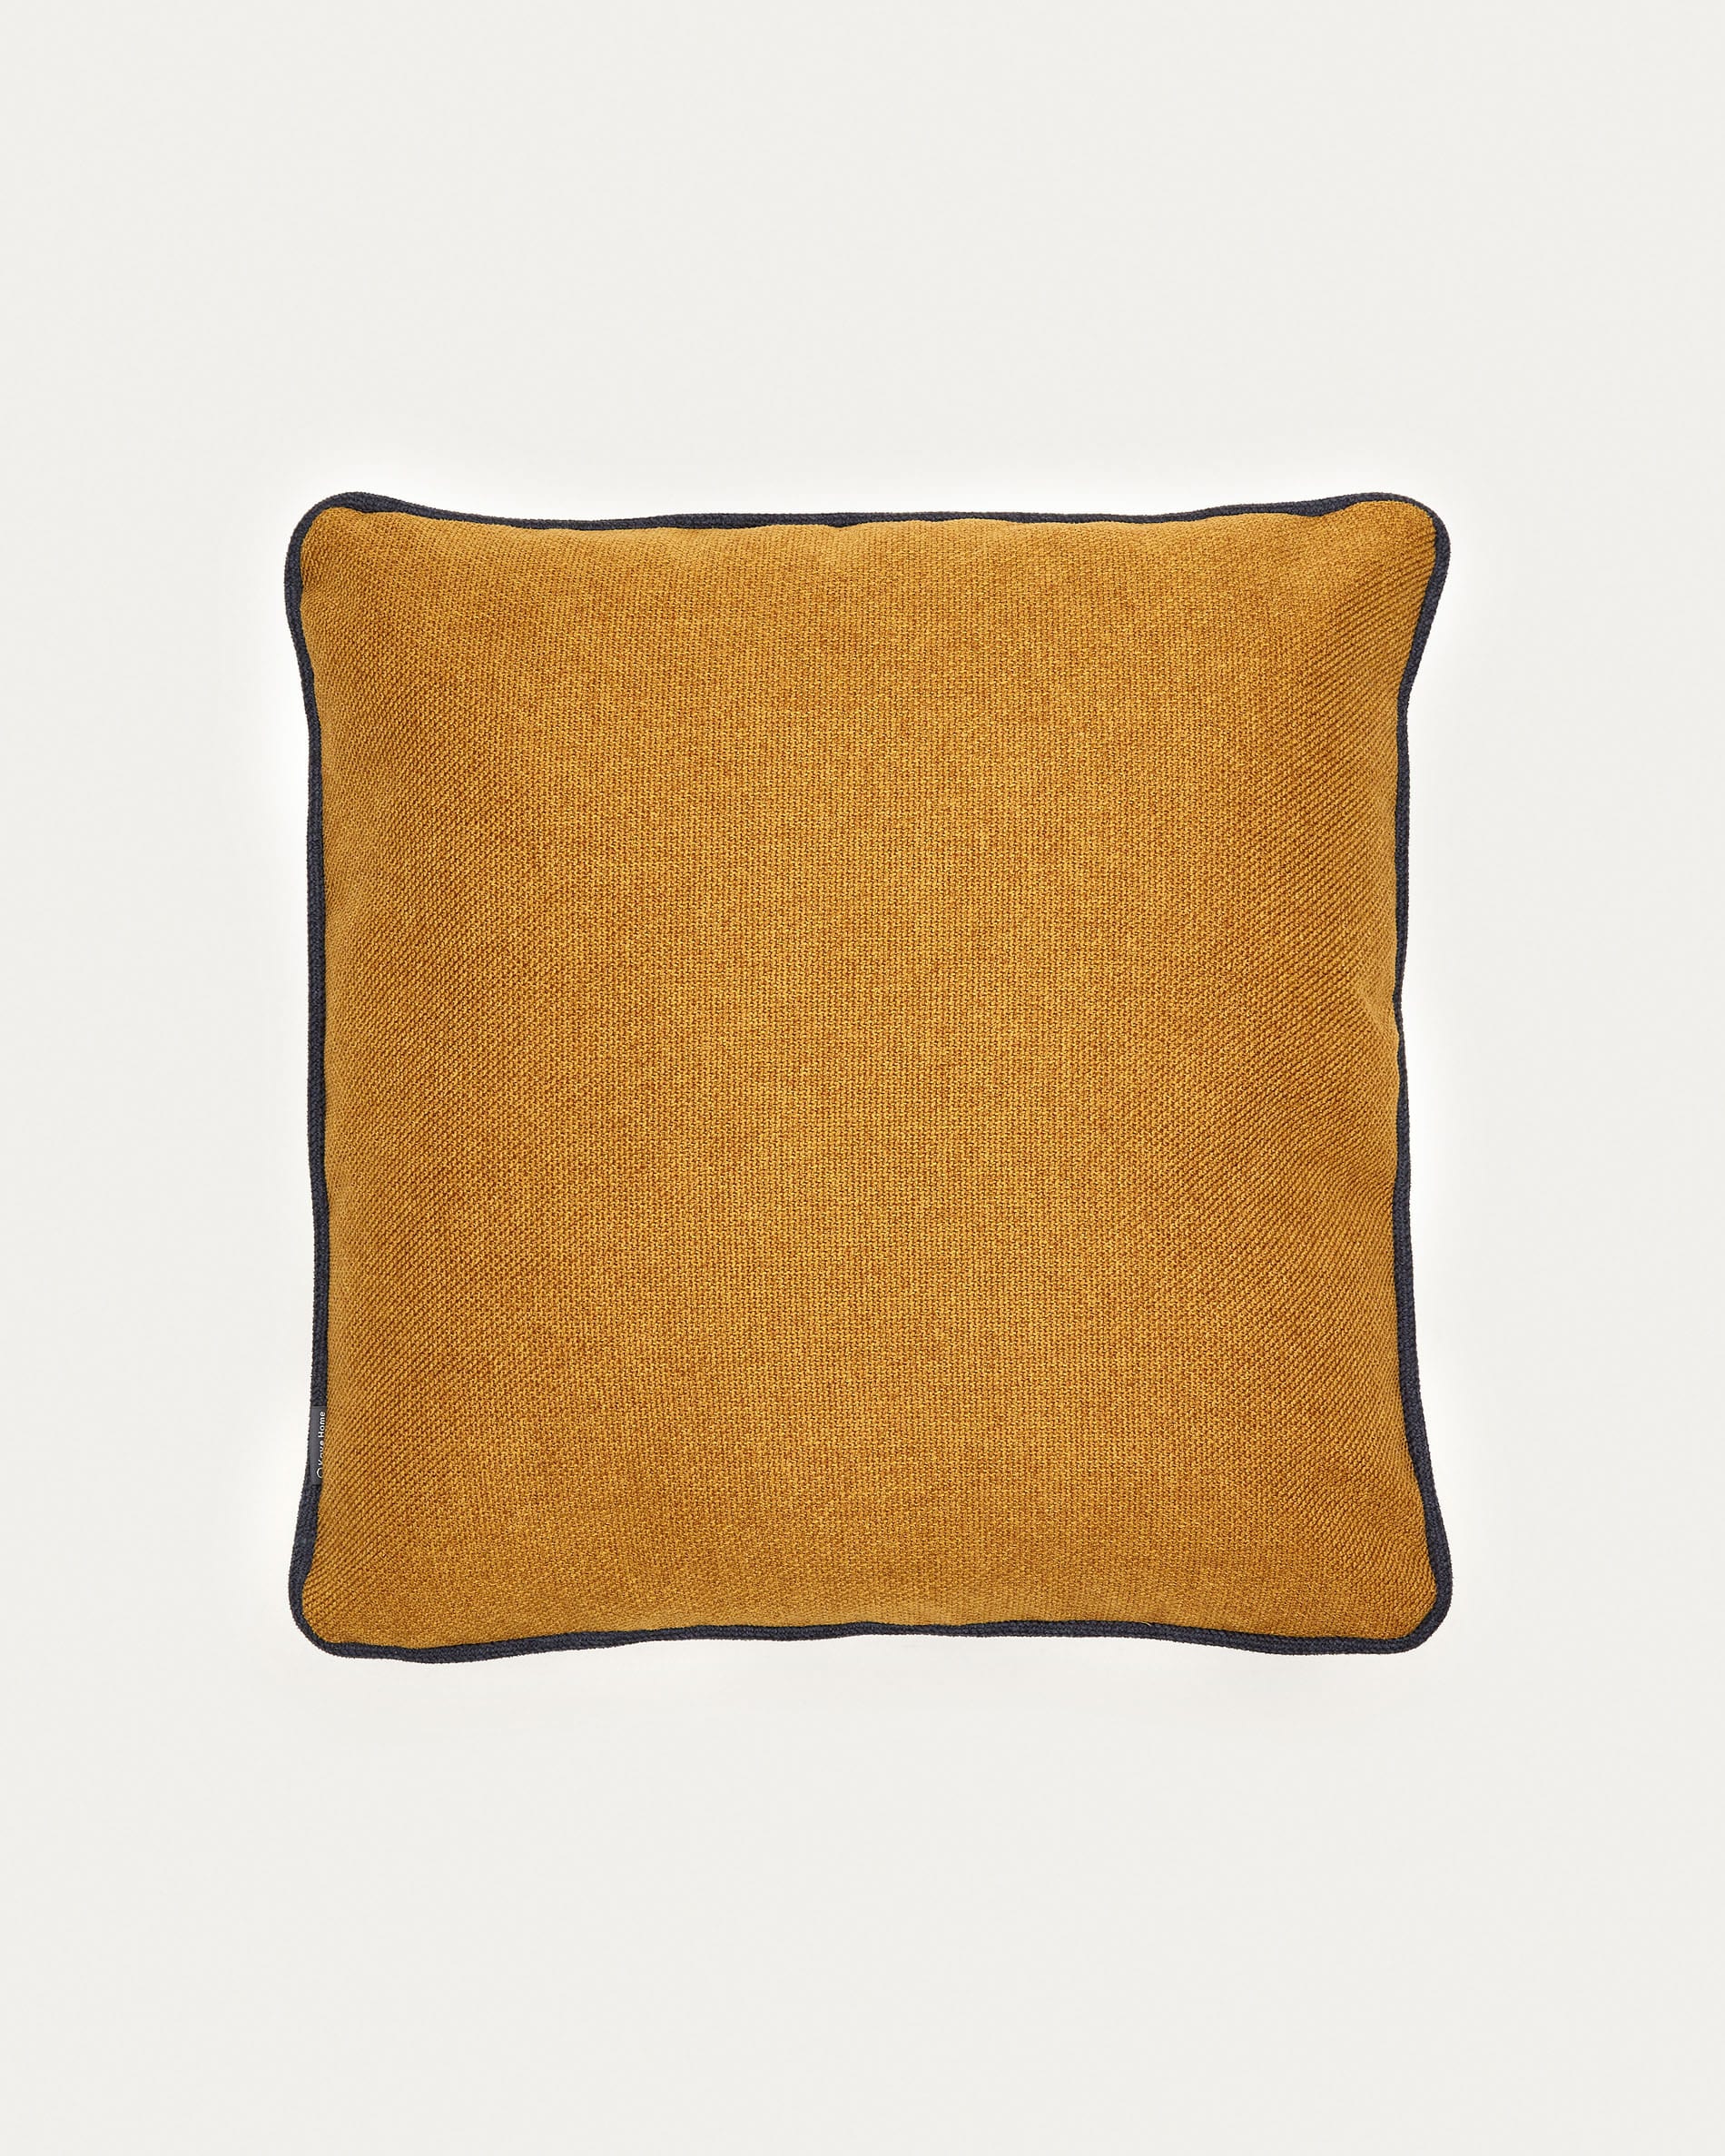 Viera cushion cover in mustard with a blue border 45 x 45 cm | Kave Home